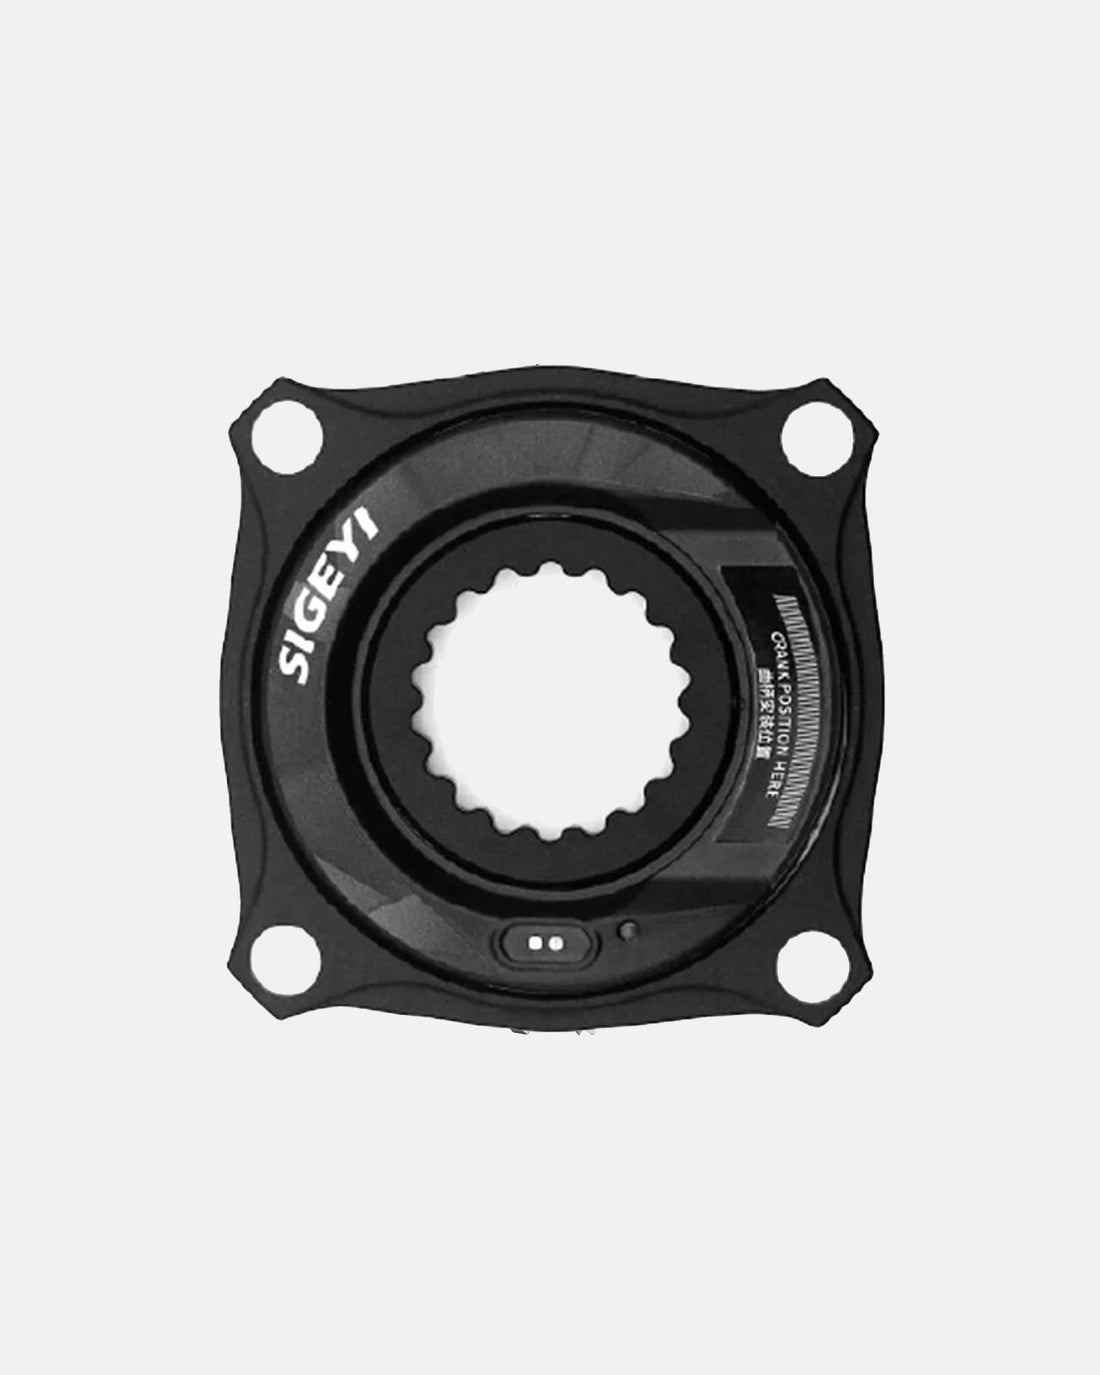 Sigeyi AXO Power Meter for Cannondale MTB - Sigeyi